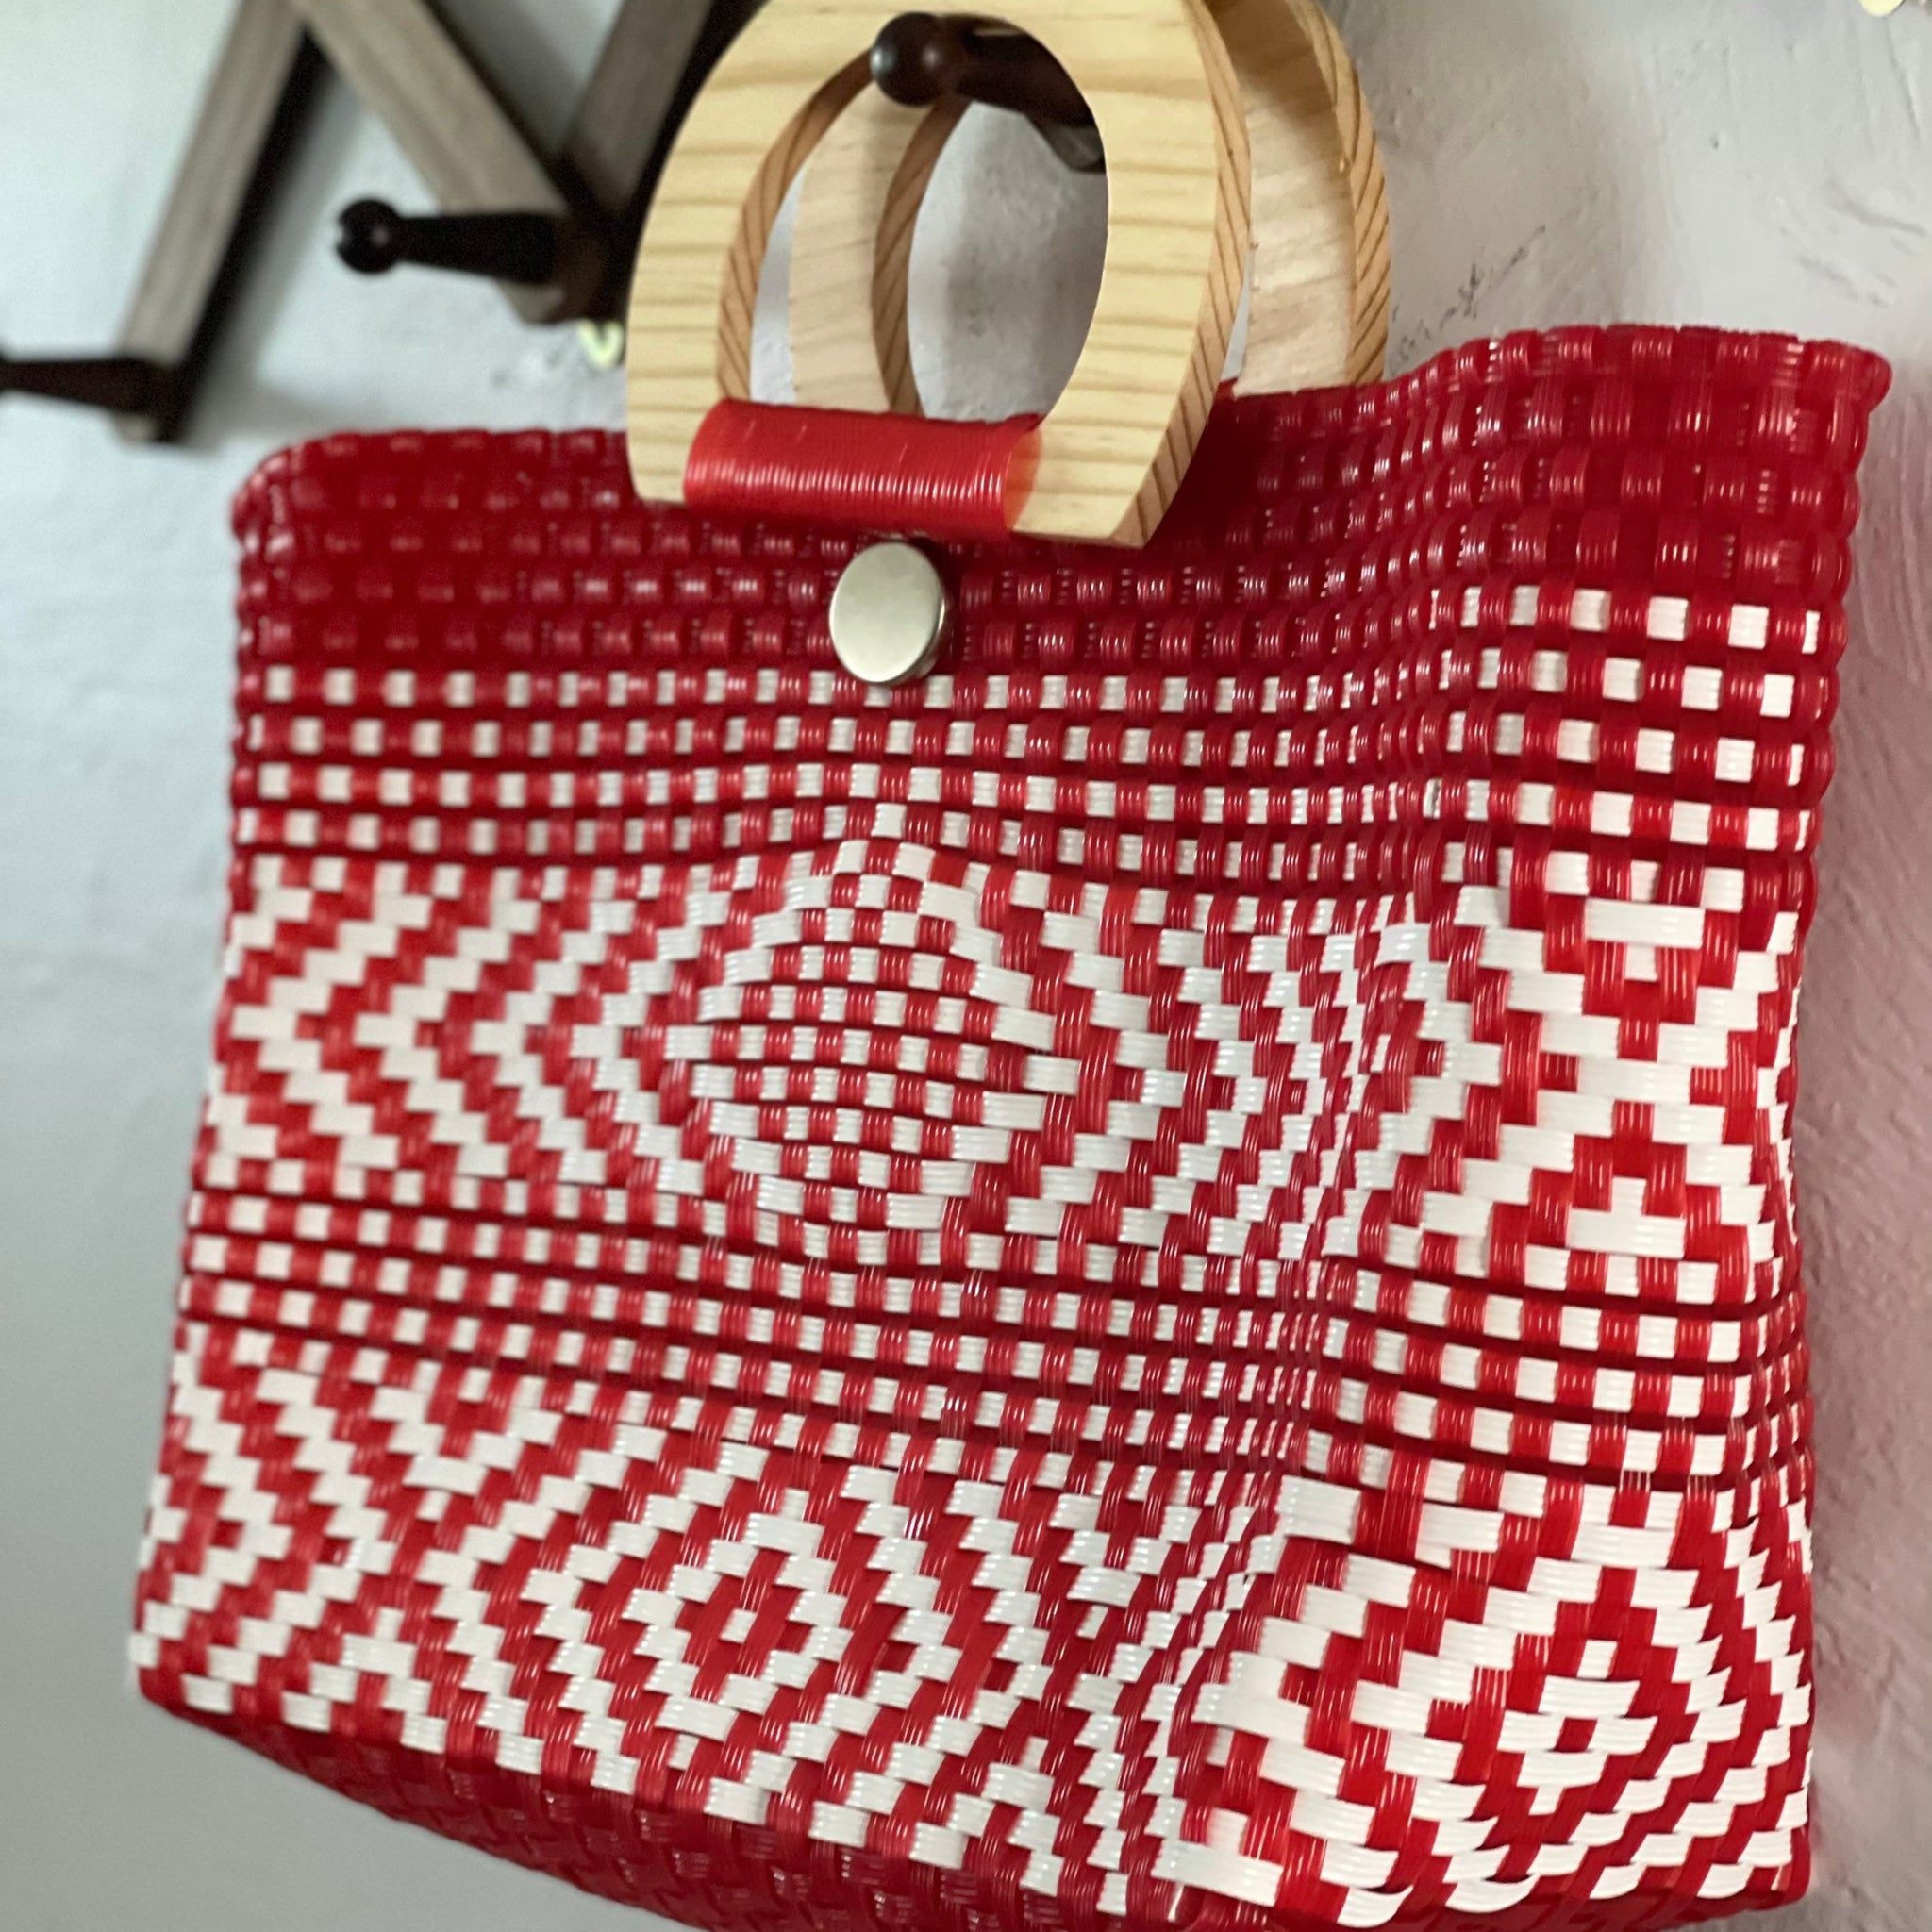 Mexican Tote Bag. Recycled Plastic Bag. Mexican Bag With 